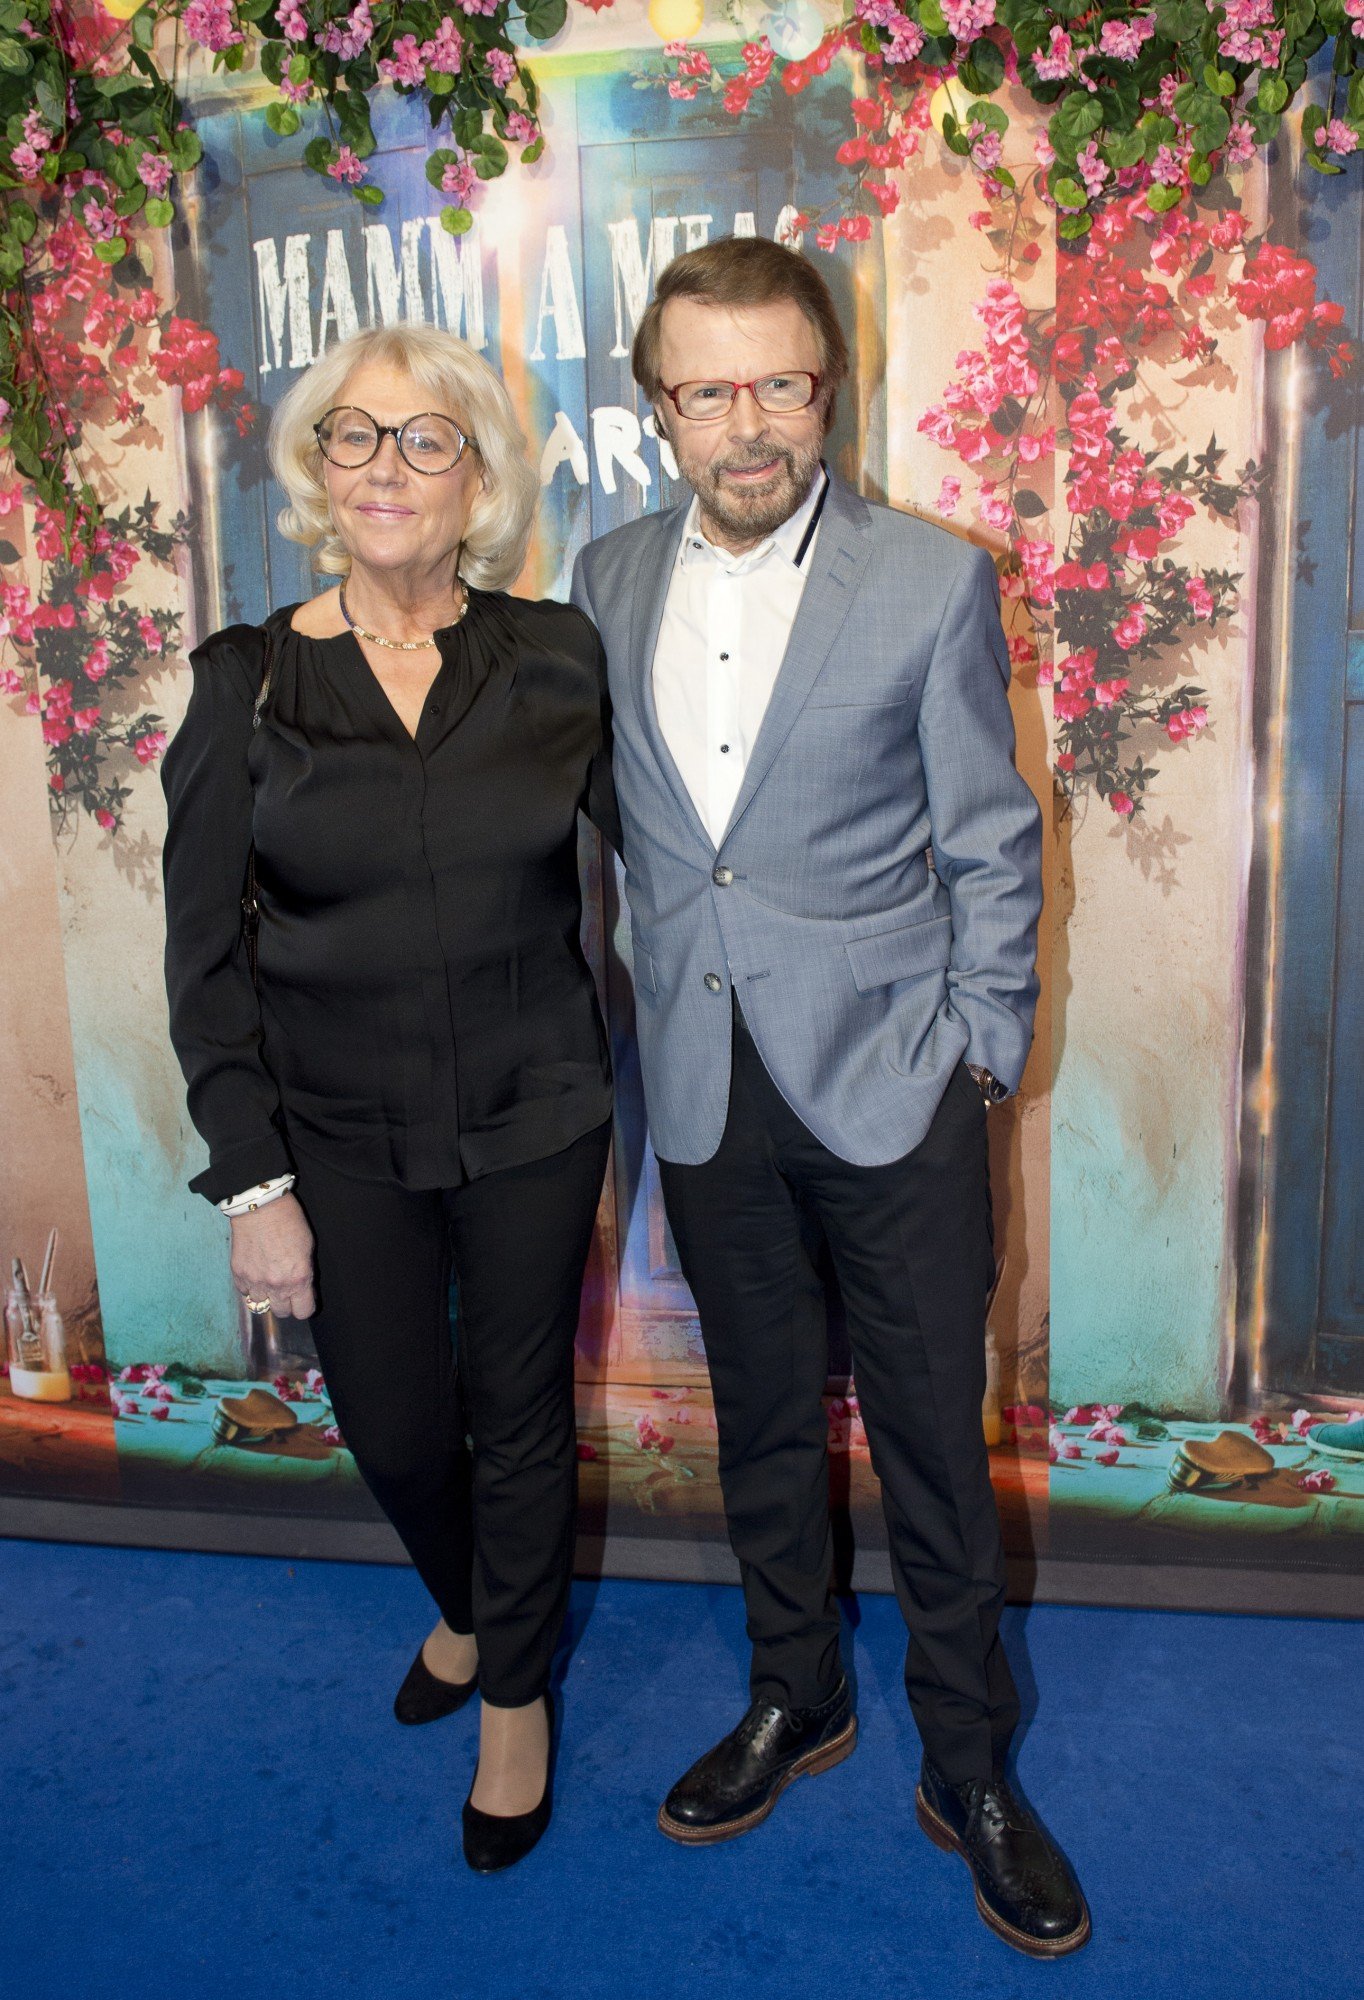 Bjorn Ulvaeus (R), a member of Swedish disco group ABBA attends the opening of "Mamma Mia! The party", a new restaurant in Stockholm where people can eat while watching a show based on ABBA's songs on January 20, 2016 in Stockholm. / AFP / JONATHAN NACKSTRAND (Photo credit should read JONATHAN NACKSTRAND/AFP/Getty Images)